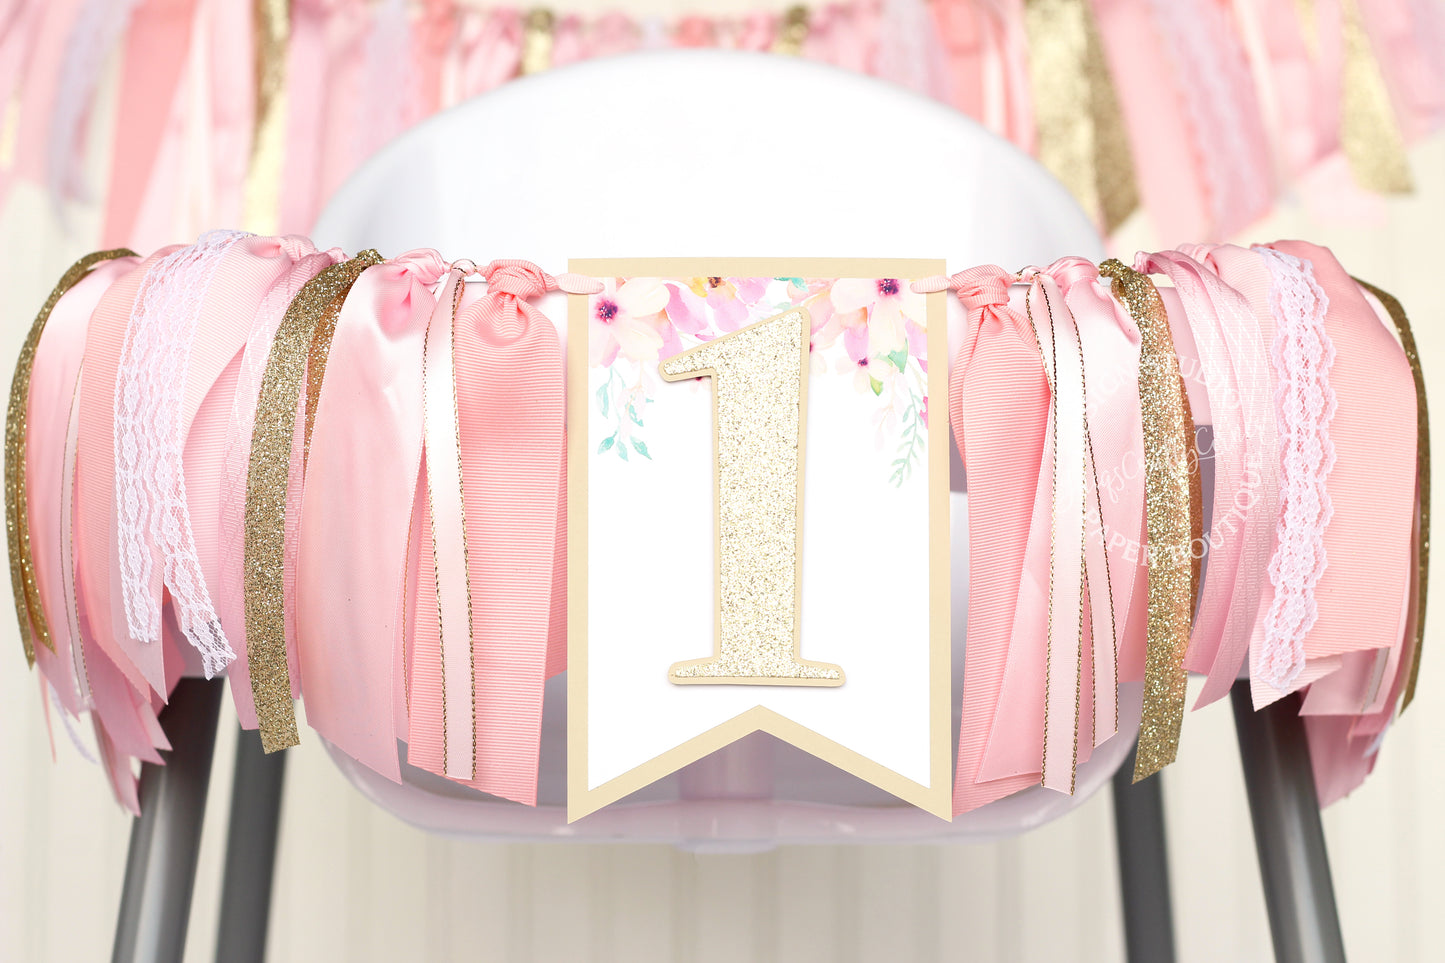 Floral High Chair Banner in Pink and Gold